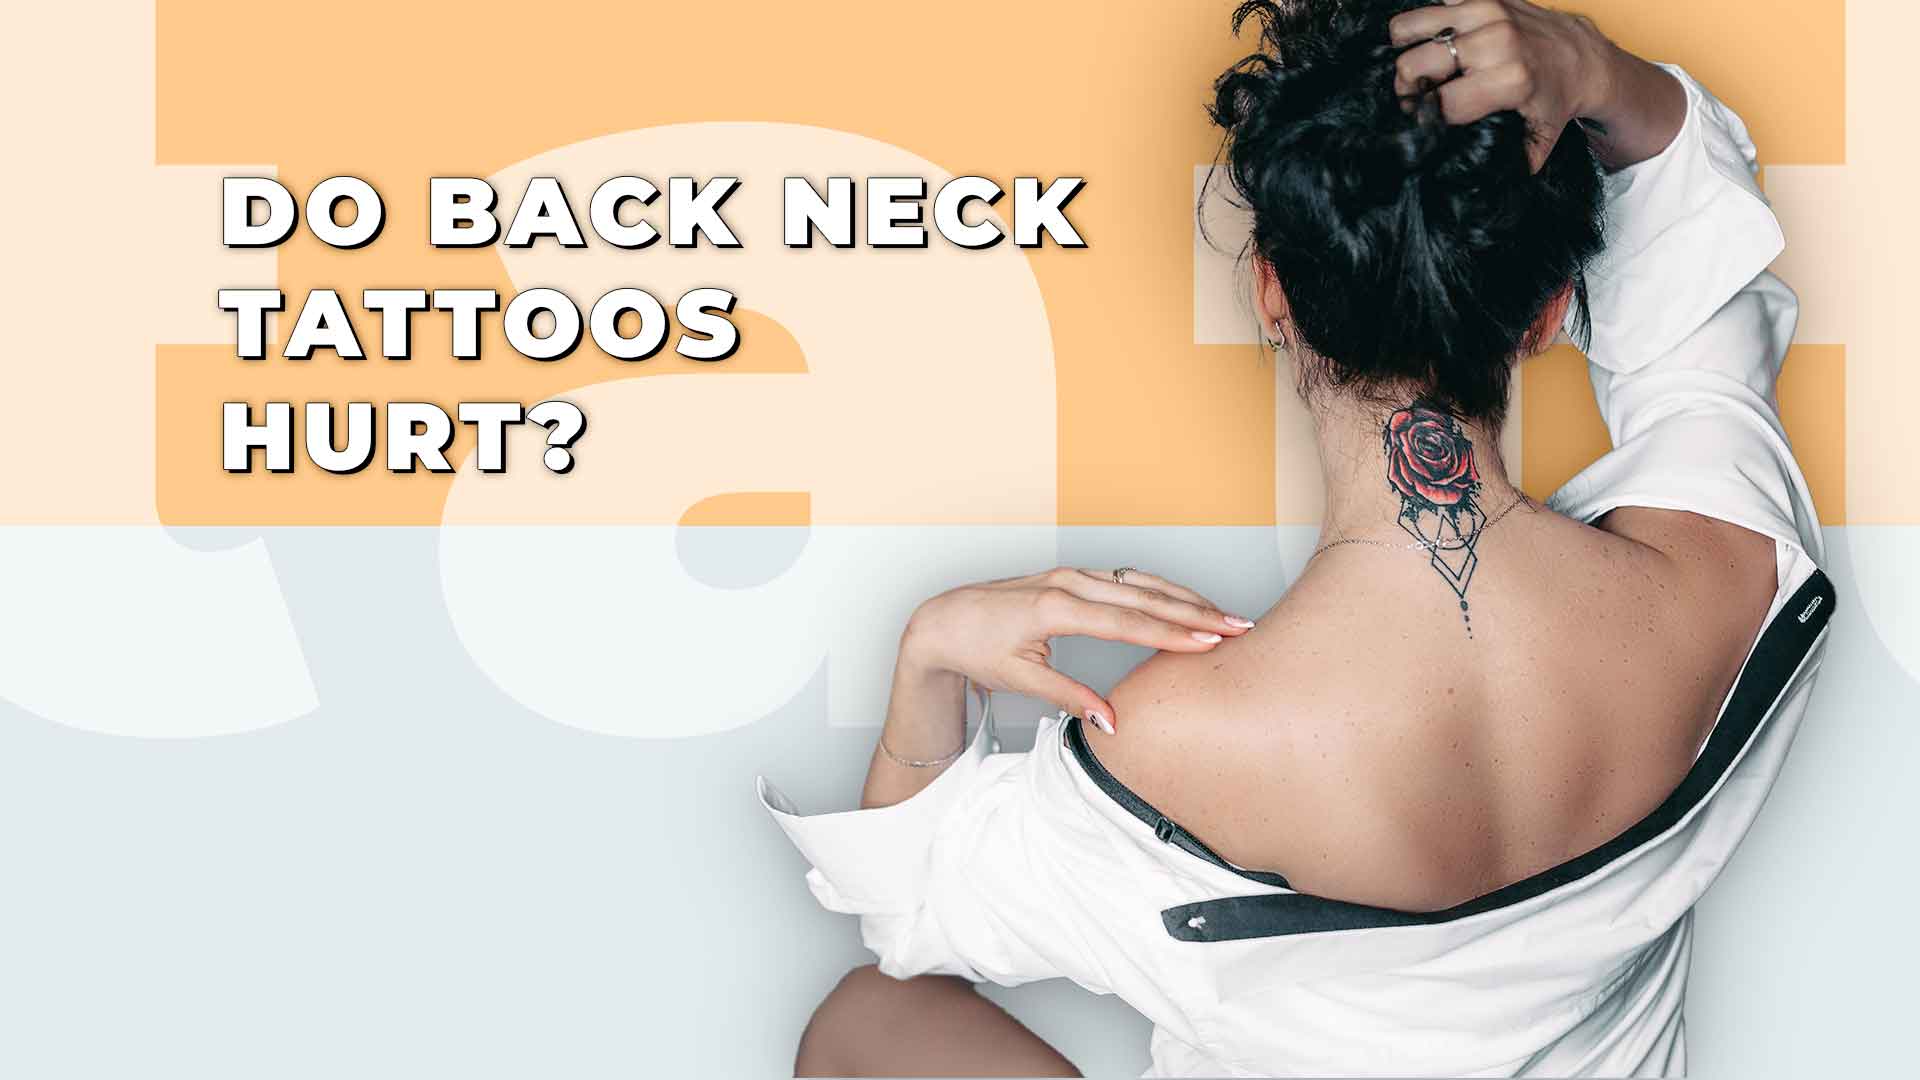 Tattoo Artists And Back Pain | Minnesota Spine Doctor | Dr. Stefano  Sinicropi